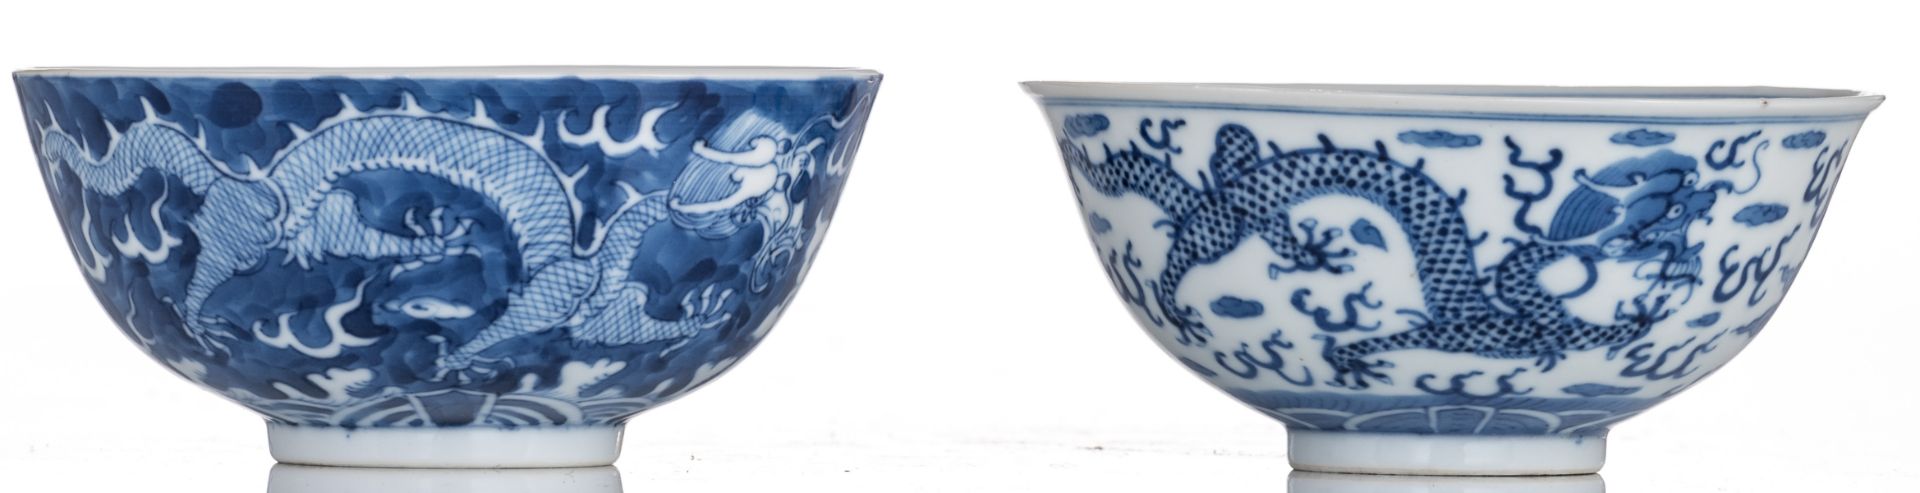 Two Chinese blue and white dragon decorated bowls, with a Kangxi mark, H 5,5 - 6 - ø 12,5 - 13 cm - Image 5 of 7